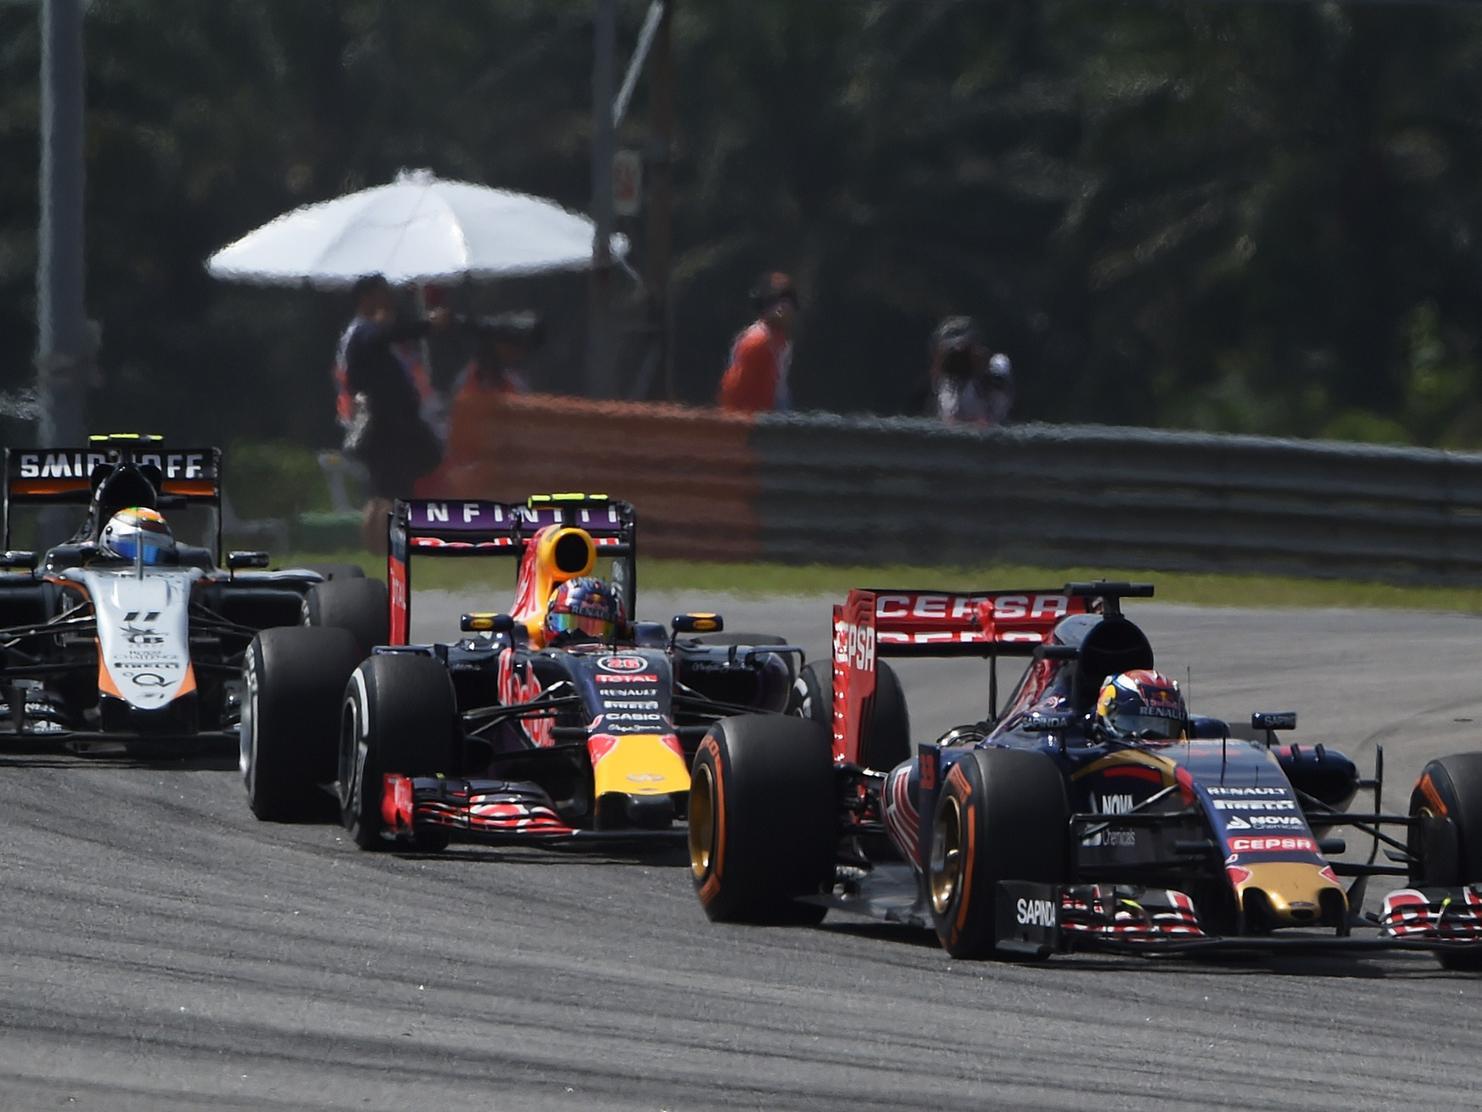 After an engine failure robbed him of points in his first race in Australia, Verstappen claimed his first points finish in Malaysia with a seventh-place finish.